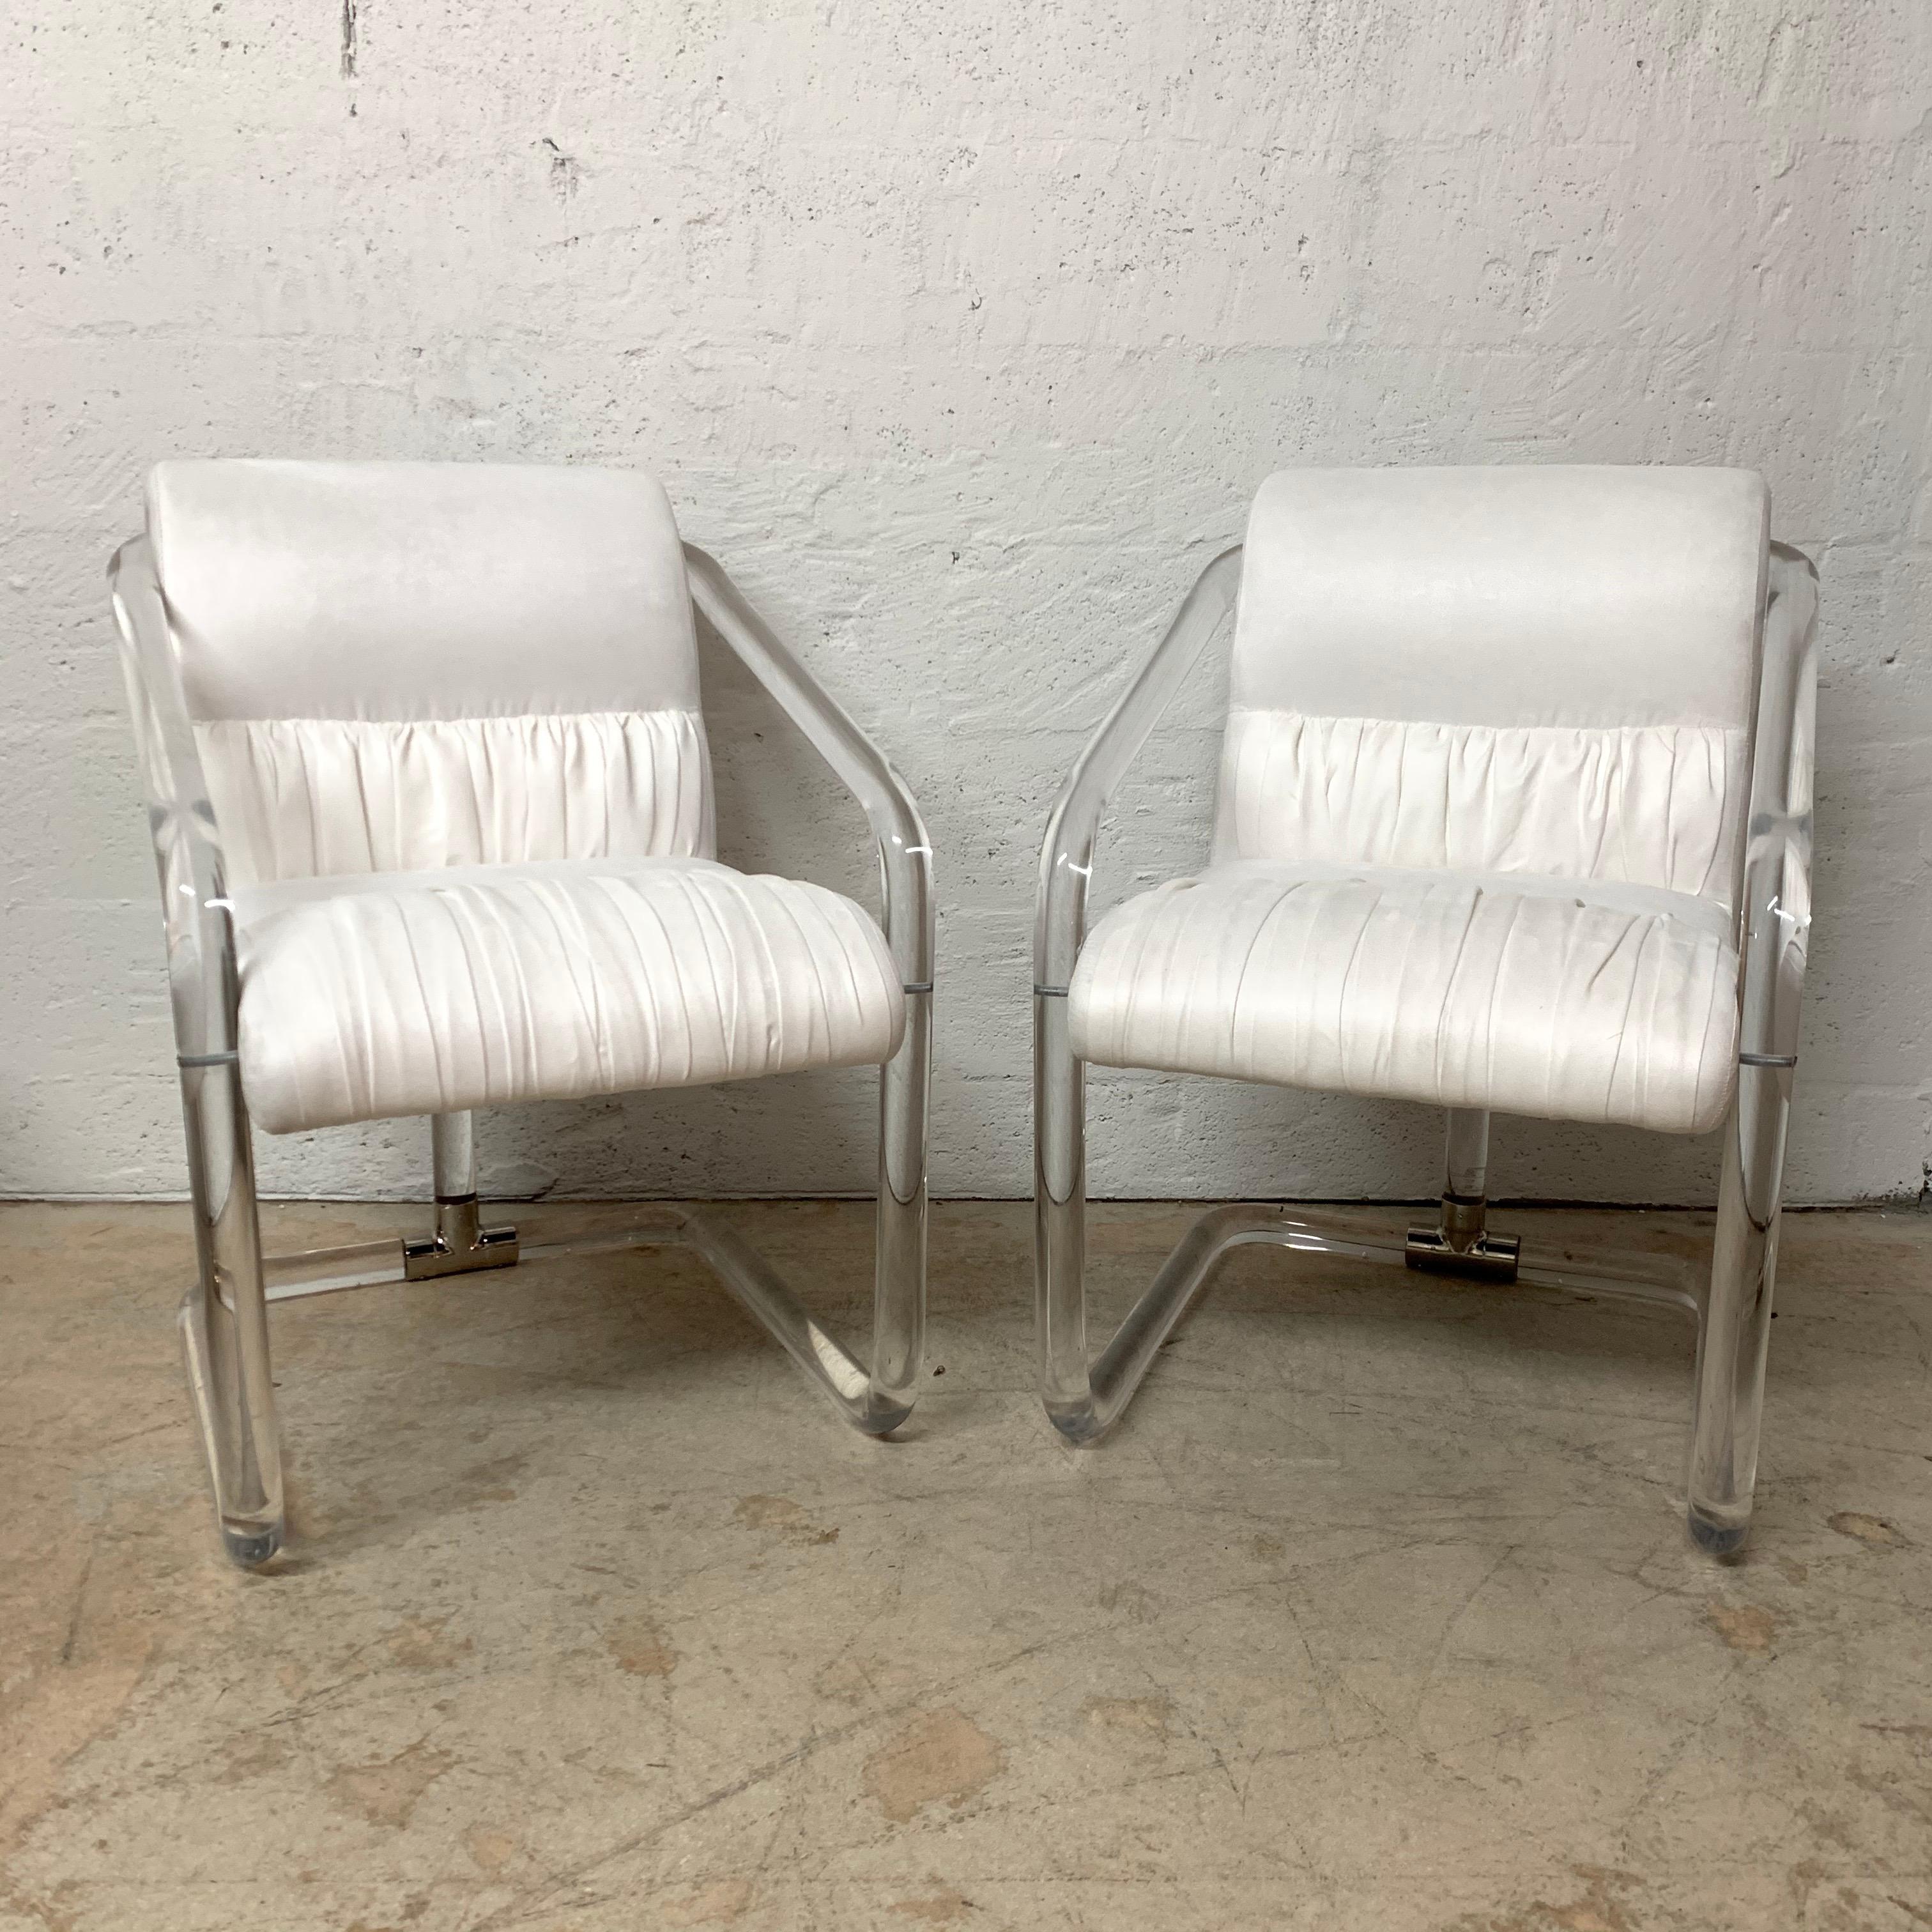 Versatile pair of chairs rendered in a bent tubular Lucite frame with nickel appointments and upholstered in creamy ivory white ultra suede fabric, signed, USA, 1970s.